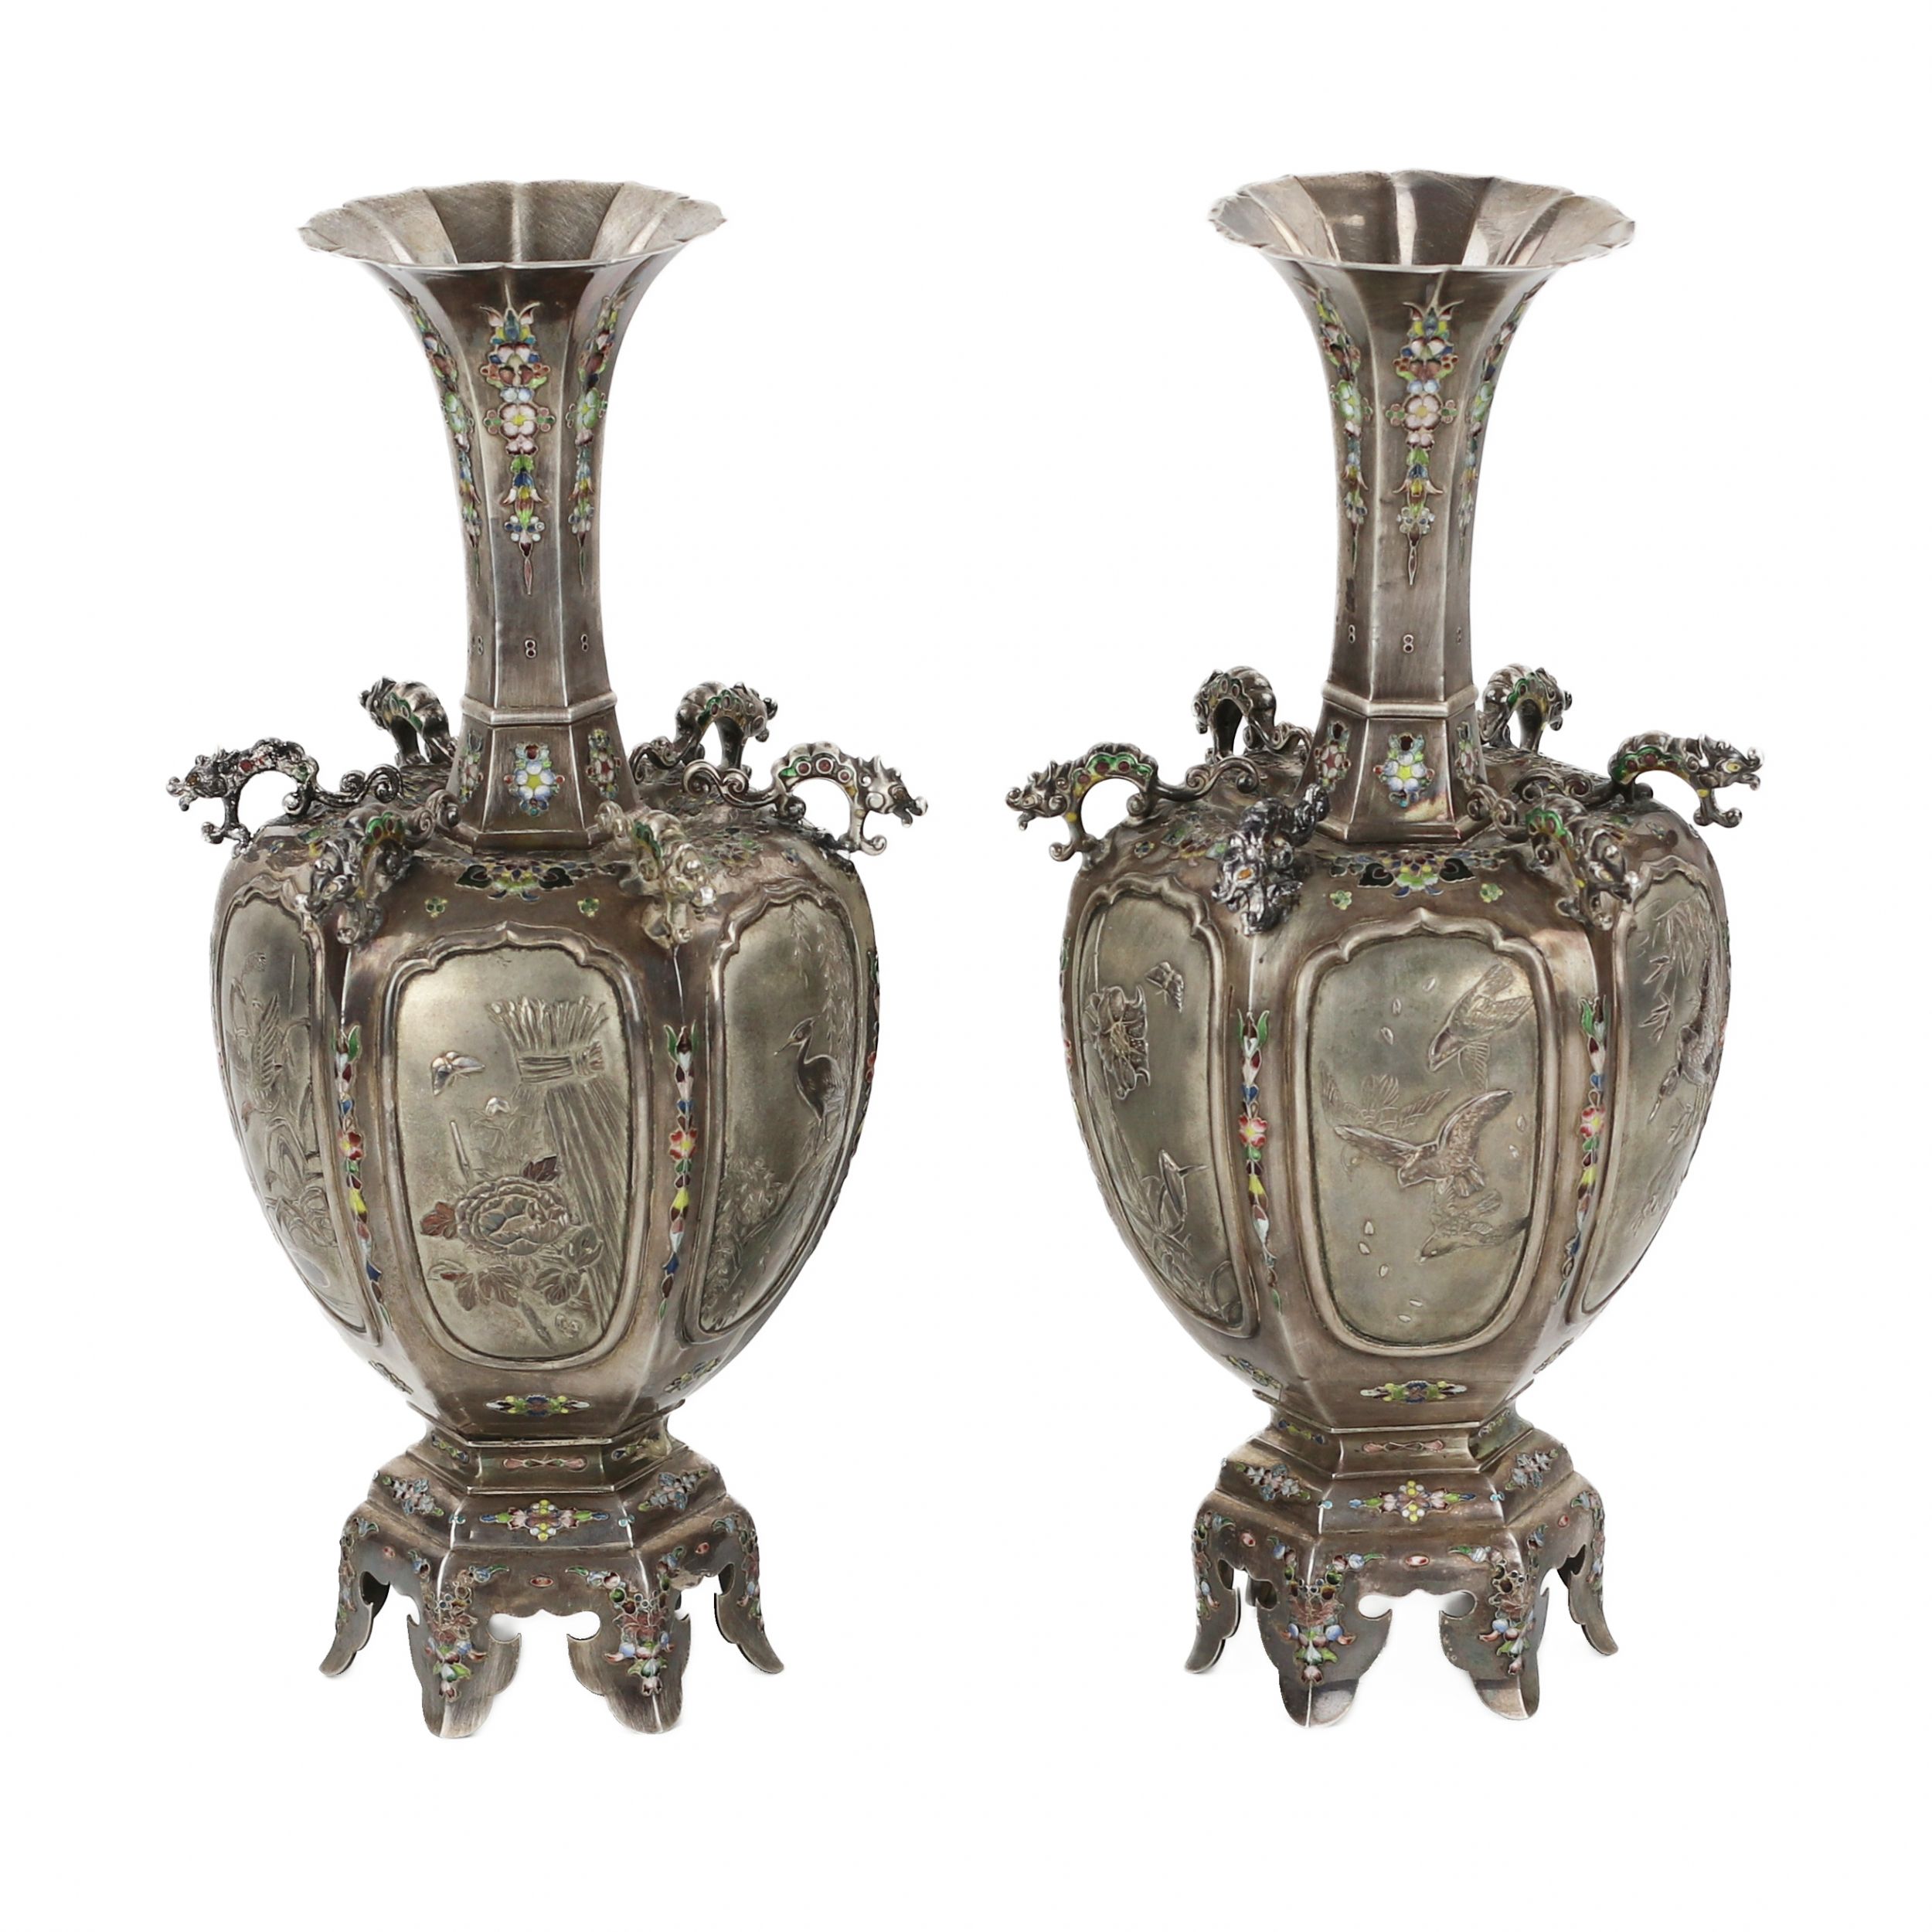 A pair of elegant Japanese vases made of silver and enamel. The turn of the 19th-20th centuries. - Bild 3 aus 6